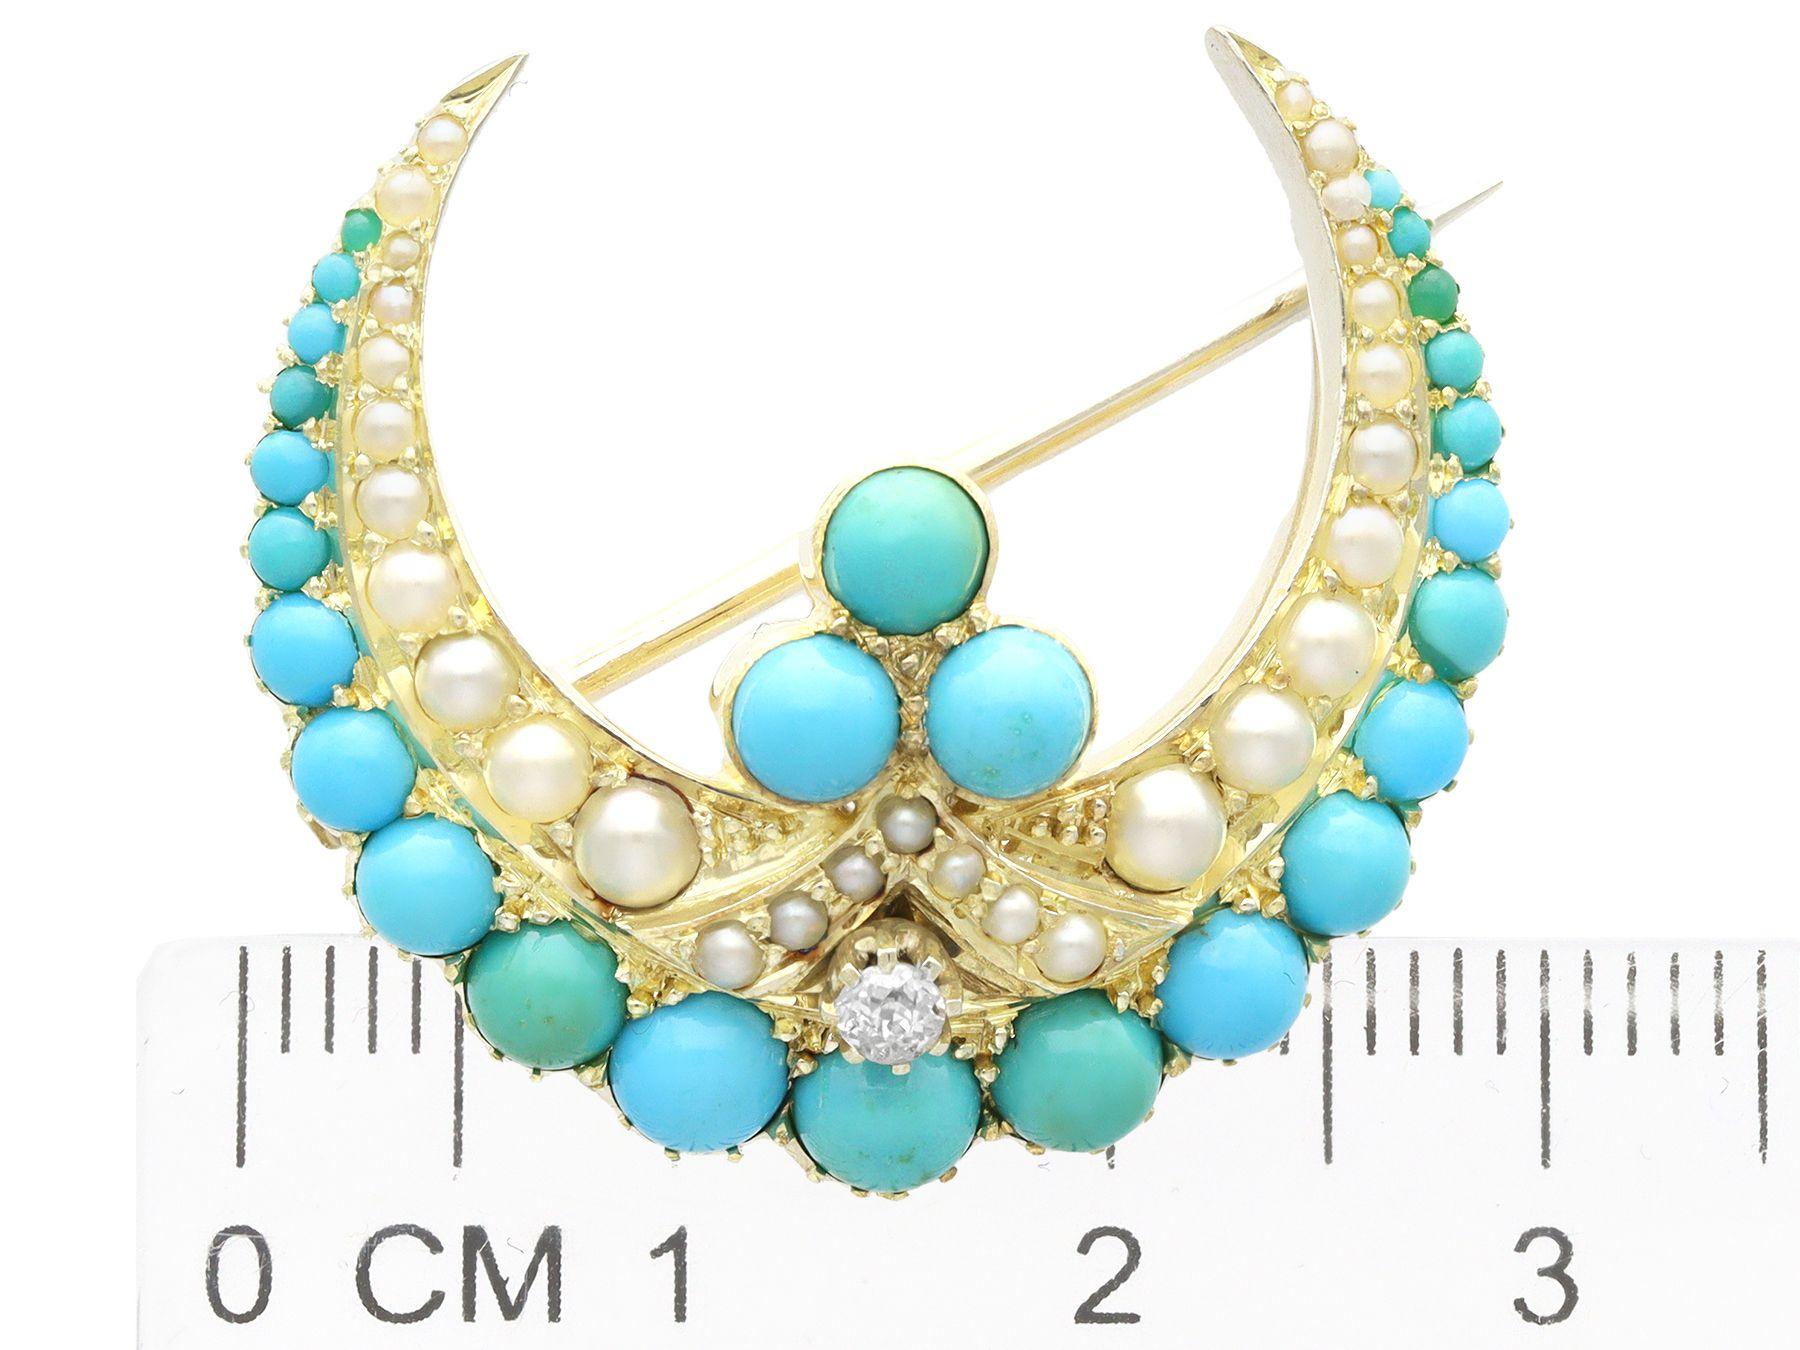 Antique 1.10 Carat Diamond 1.90 Carat Turquoise and Pearl Yellow Gold Brooch For Sale 2